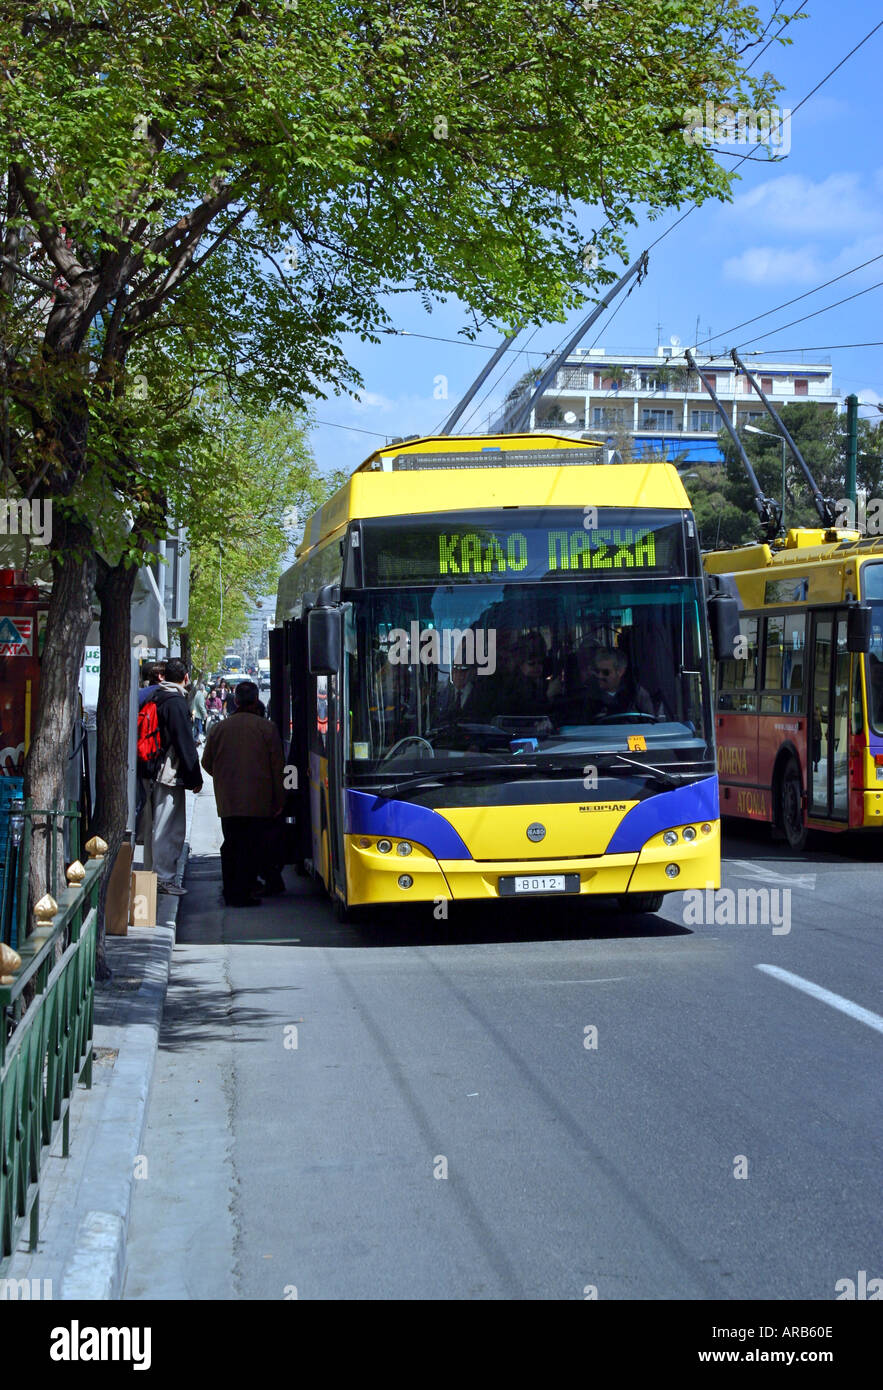 Bus cable yellow public Athens transport tram road people passengers side day electricity old Kalo Pasxa Happy Easter blue tree Stock Photo